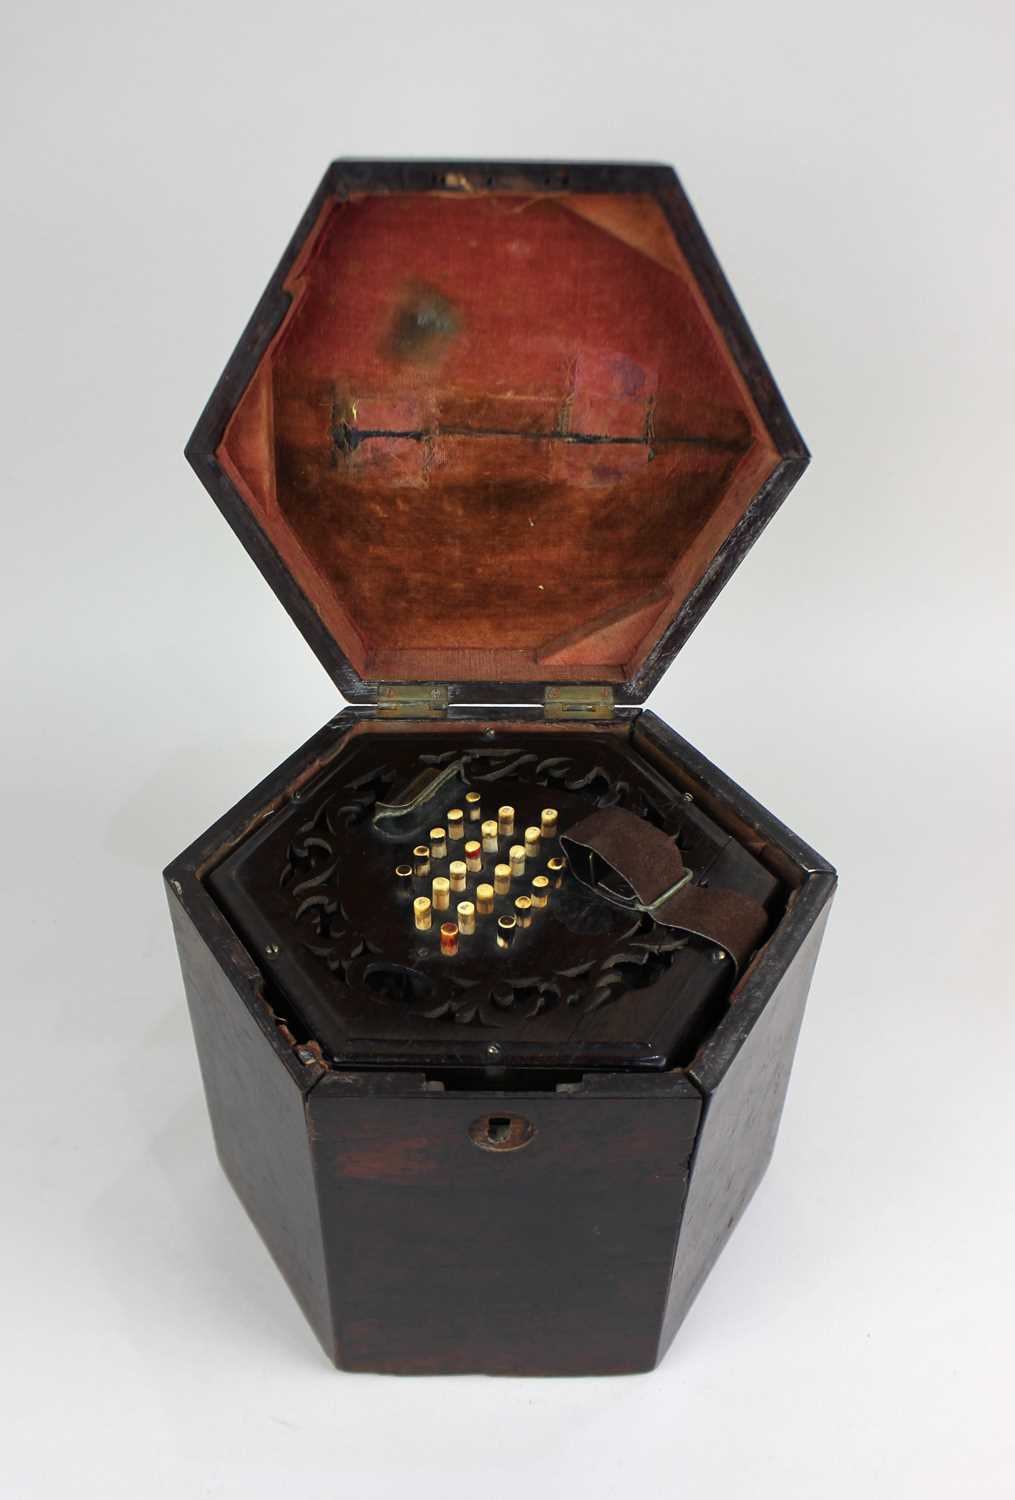 A 19th century forty eight button concertina in the manner of Wheatstone, with fretwork decorated - Image 2 of 2